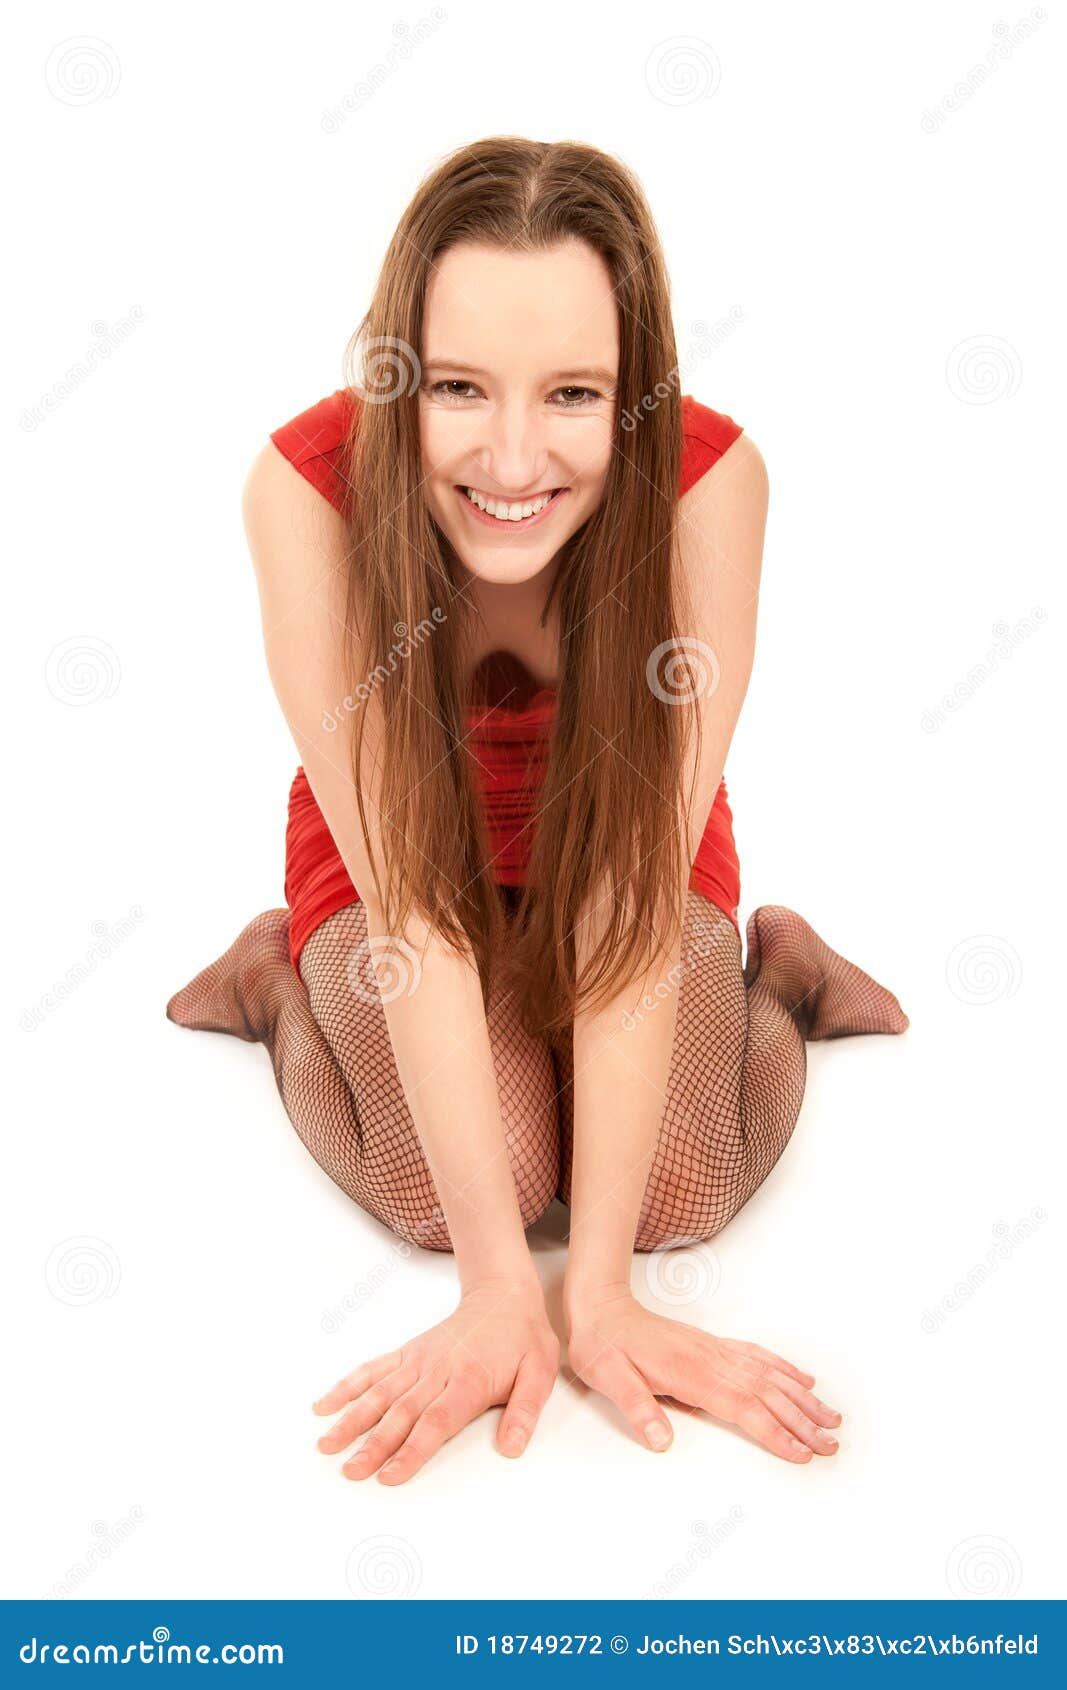 Girl On Her Knees Mouth Open